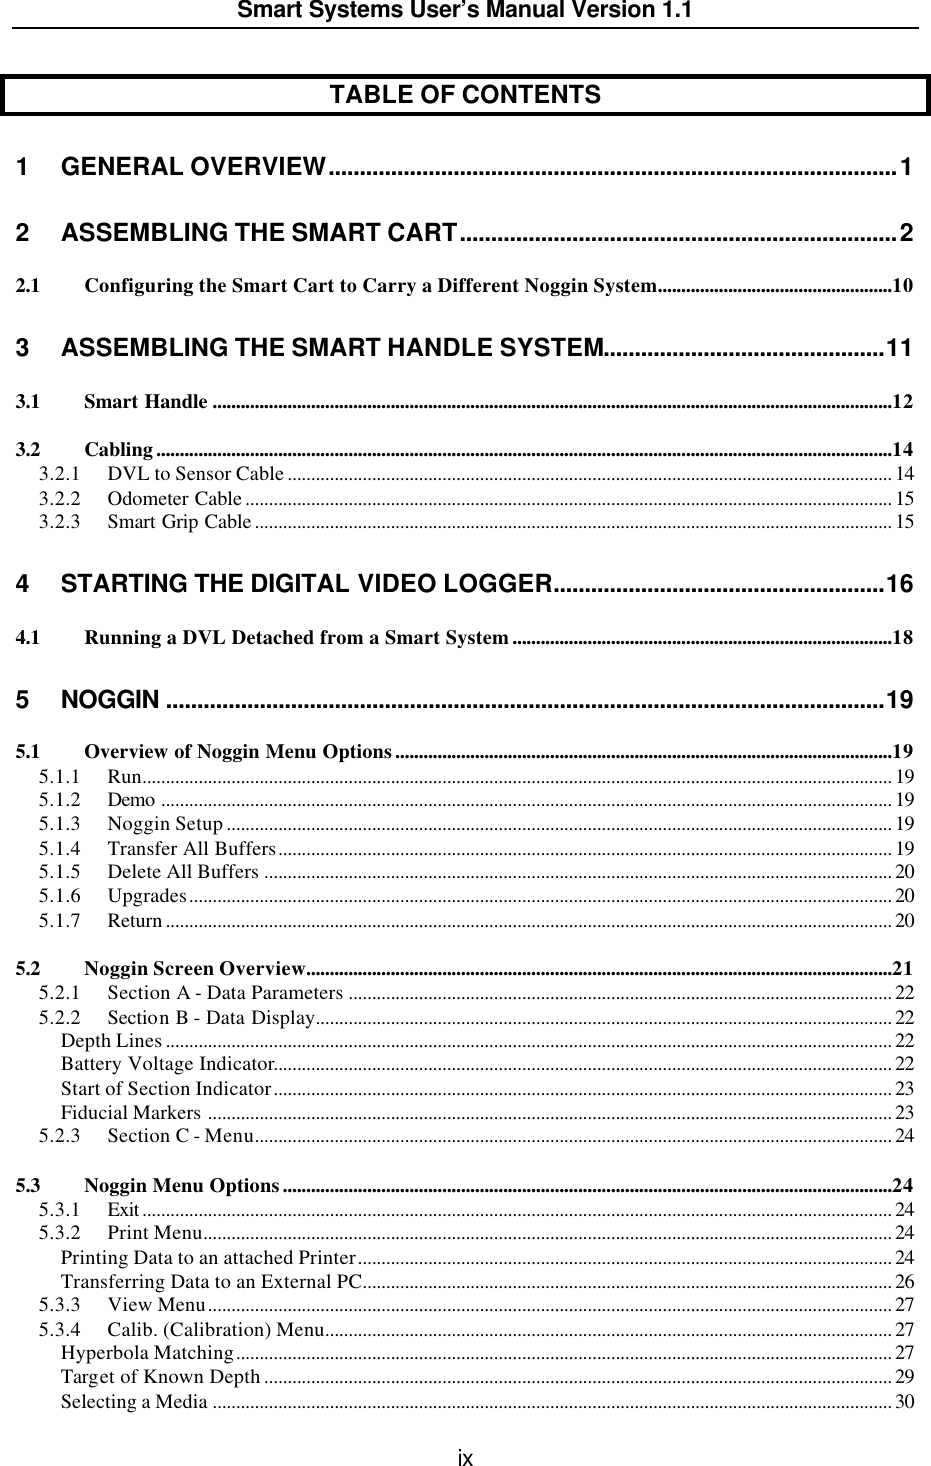  Smart Systems User’s Manual Version 1.1  ix  TABLE OF CONTENTS 1 GENERAL OVERVIEW...........................................................................................1 2 ASSEMBLING THE SMART CART......................................................................2 2.1 Configuring the Smart Cart to Carry a Different Noggin System..................................................10 3 ASSEMBLING THE SMART HANDLE SYSTEM.............................................11 3.1 Smart Handle .................................................................................................................................................12 3.2 Cabling.............................................................................................................................................................14 3.2.1 DVL to Sensor Cable ................................................................................................................................. 14 3.2.2 Odometer Cable .......................................................................................................................................... 15 3.2.3 Smart Grip Cable ........................................................................................................................................ 15 4 STARTING THE DIGITAL VIDEO LOGGER.....................................................16 4.1 Running a DVL Detached from a Smart System.................................................................................18 5 NOGGIN ...................................................................................................................19 5.1 Overview of Noggin Menu Options..........................................................................................................19 5.1.1 Run................................................................................................................................................................ 19 5.1.2 Demo ............................................................................................................................................................ 19 5.1.3 Noggin Setup .............................................................................................................................................. 19 5.1.4 Transfer All Buffers................................................................................................................................... 19 5.1.5 Delete All Buffers ...................................................................................................................................... 20 5.1.6 Upgrades...................................................................................................................................................... 20 5.1.7 Return ........................................................................................................................................................... 20 5.2 Noggin Screen Overview.............................................................................................................................21 5.2.1 Section A - Data Parameters .................................................................................................................... 22 5.2.2 Section B - Data Display........................................................................................................................... 22 Depth Lines ........................................................................................................................................................... 22 Battery Voltage Indicator.................................................................................................................................... 22 Start of Section Indicator.................................................................................................................................... 23 Fiducial Markers .................................................................................................................................................. 23 5.2.3 Section C - Menu........................................................................................................................................ 24 5.3 Noggin Menu Options..................................................................................................................................24 5.3.1 Exit ................................................................................................................................................................ 24 5.3.2 Print Menu................................................................................................................................................... 24 Printing Data to an attached Printer.................................................................................................................. 24 Transferring Data to an External PC................................................................................................................. 26 5.3.3 View Menu.................................................................................................................................................. 27 5.3.4 Calib. (Calibration) Menu......................................................................................................................... 27 Hyperbola Matching............................................................................................................................................ 27 Target of Known Depth ...................................................................................................................................... 29 Selecting a Media ................................................................................................................................................. 30 